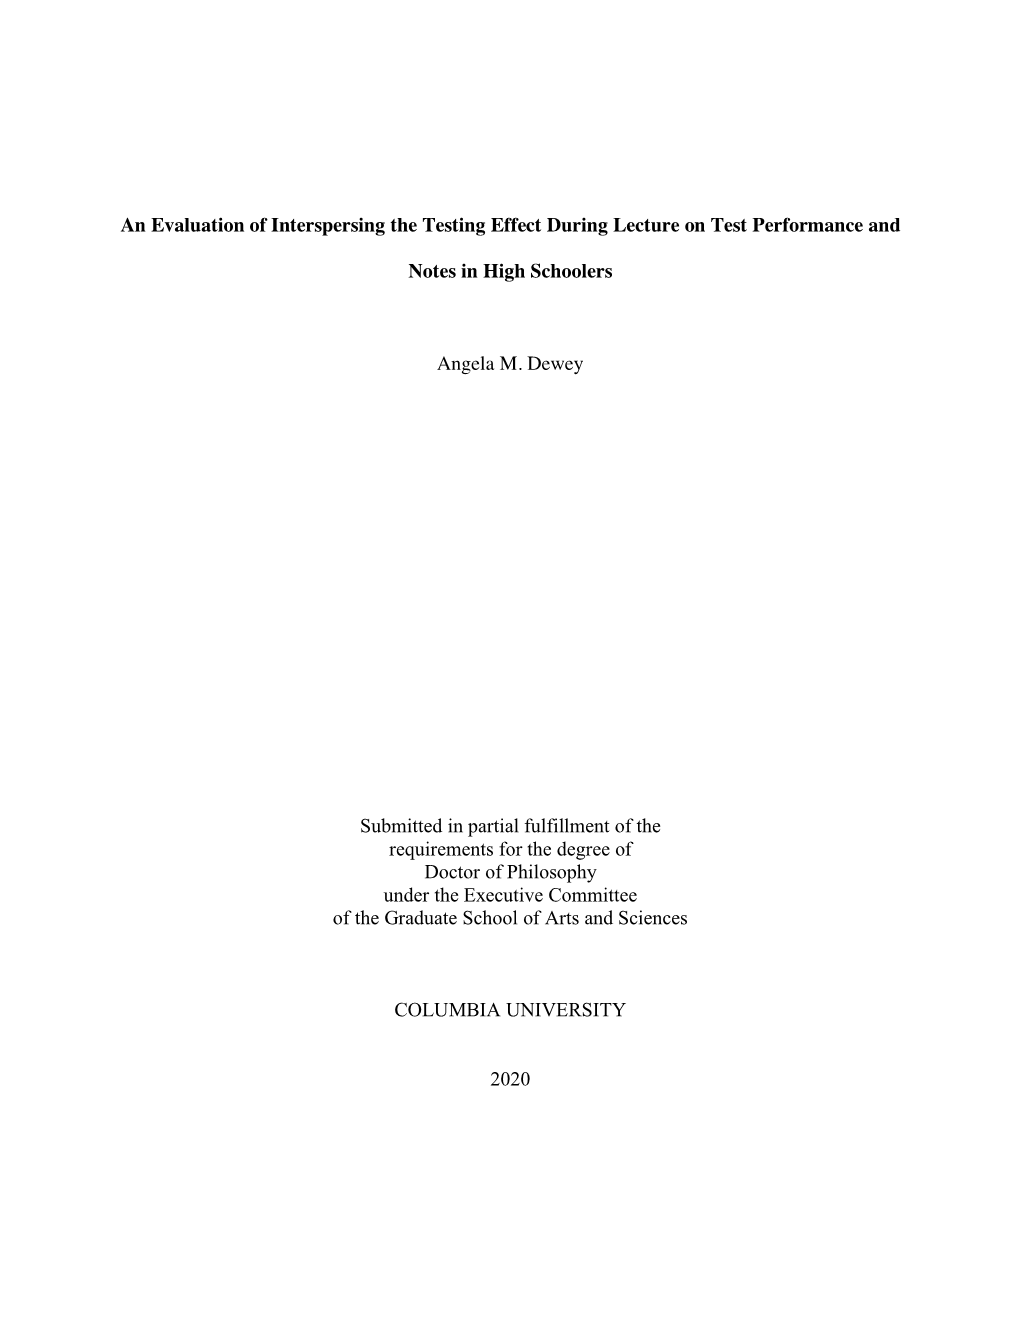 An Evaluation of Interspersing the Testing Effect During Lecture on Test Performance And